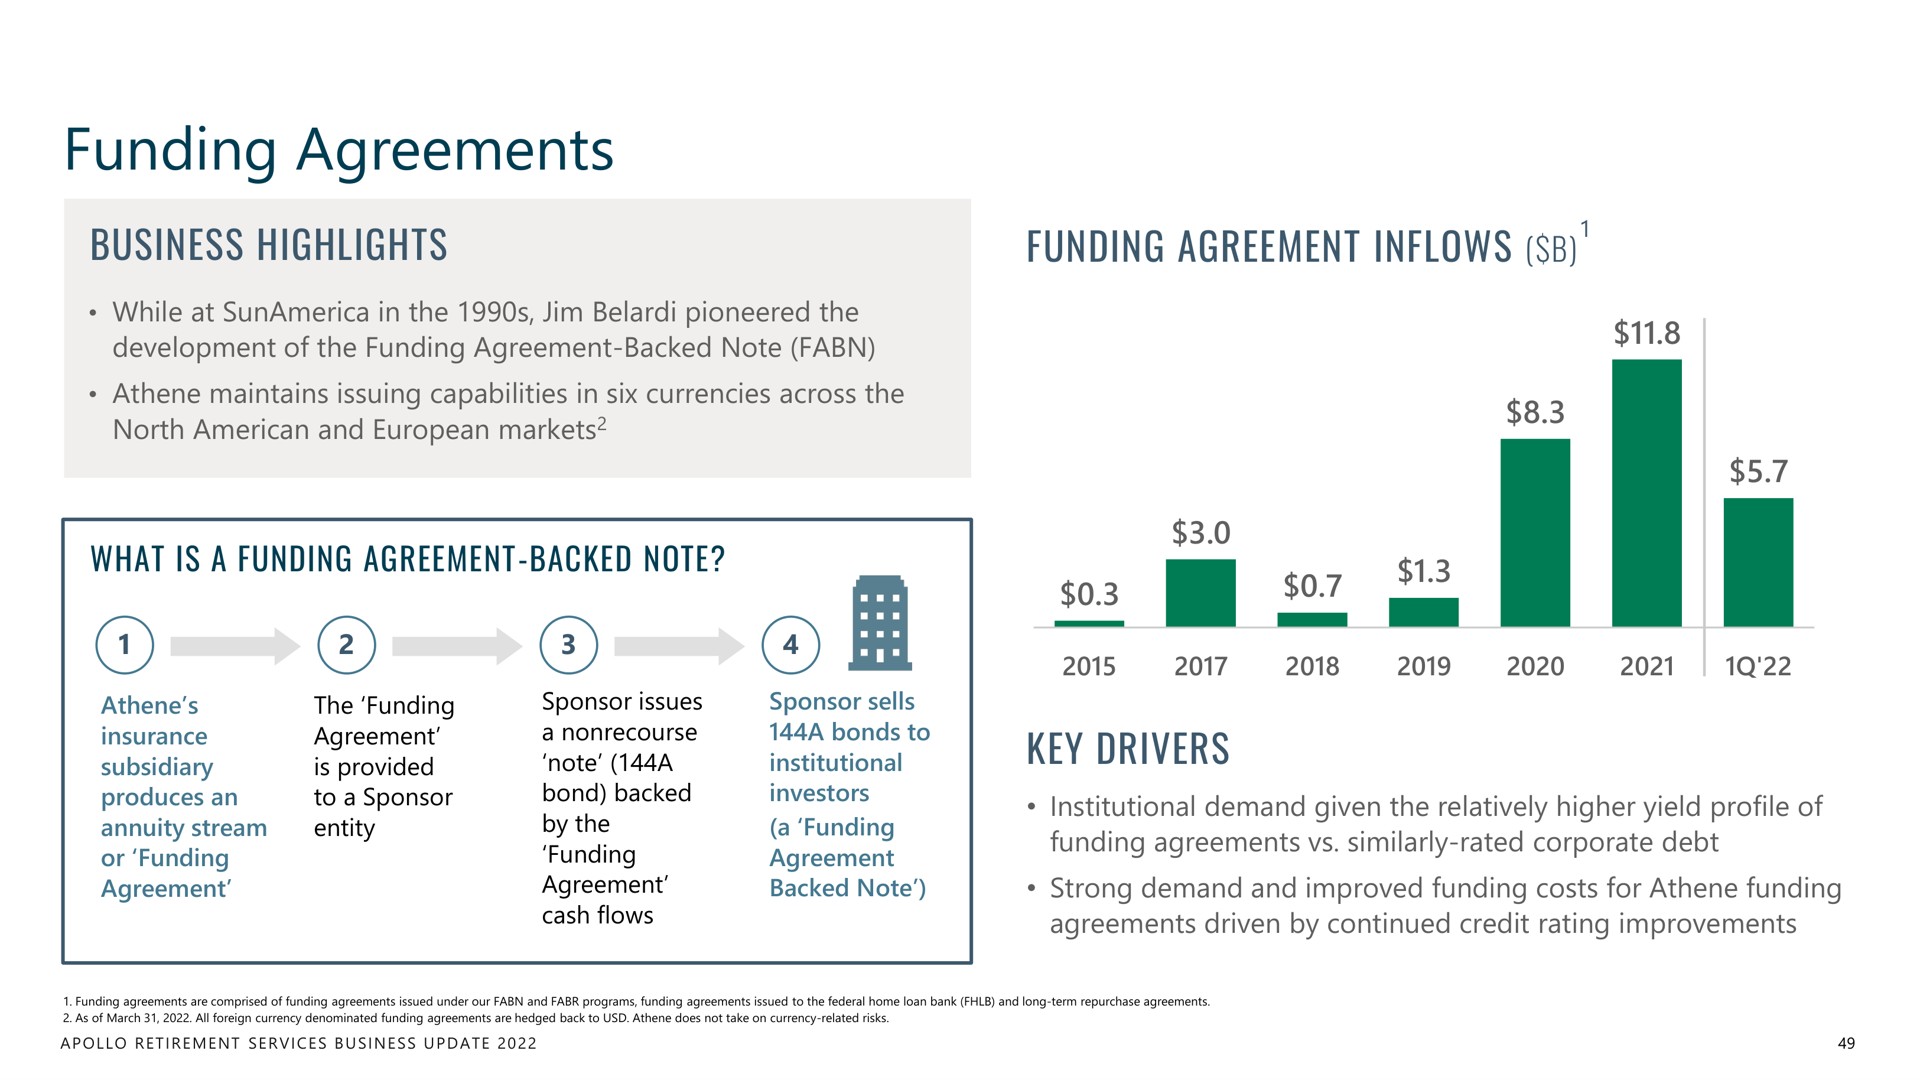 funding agreements | Apollo Global Management